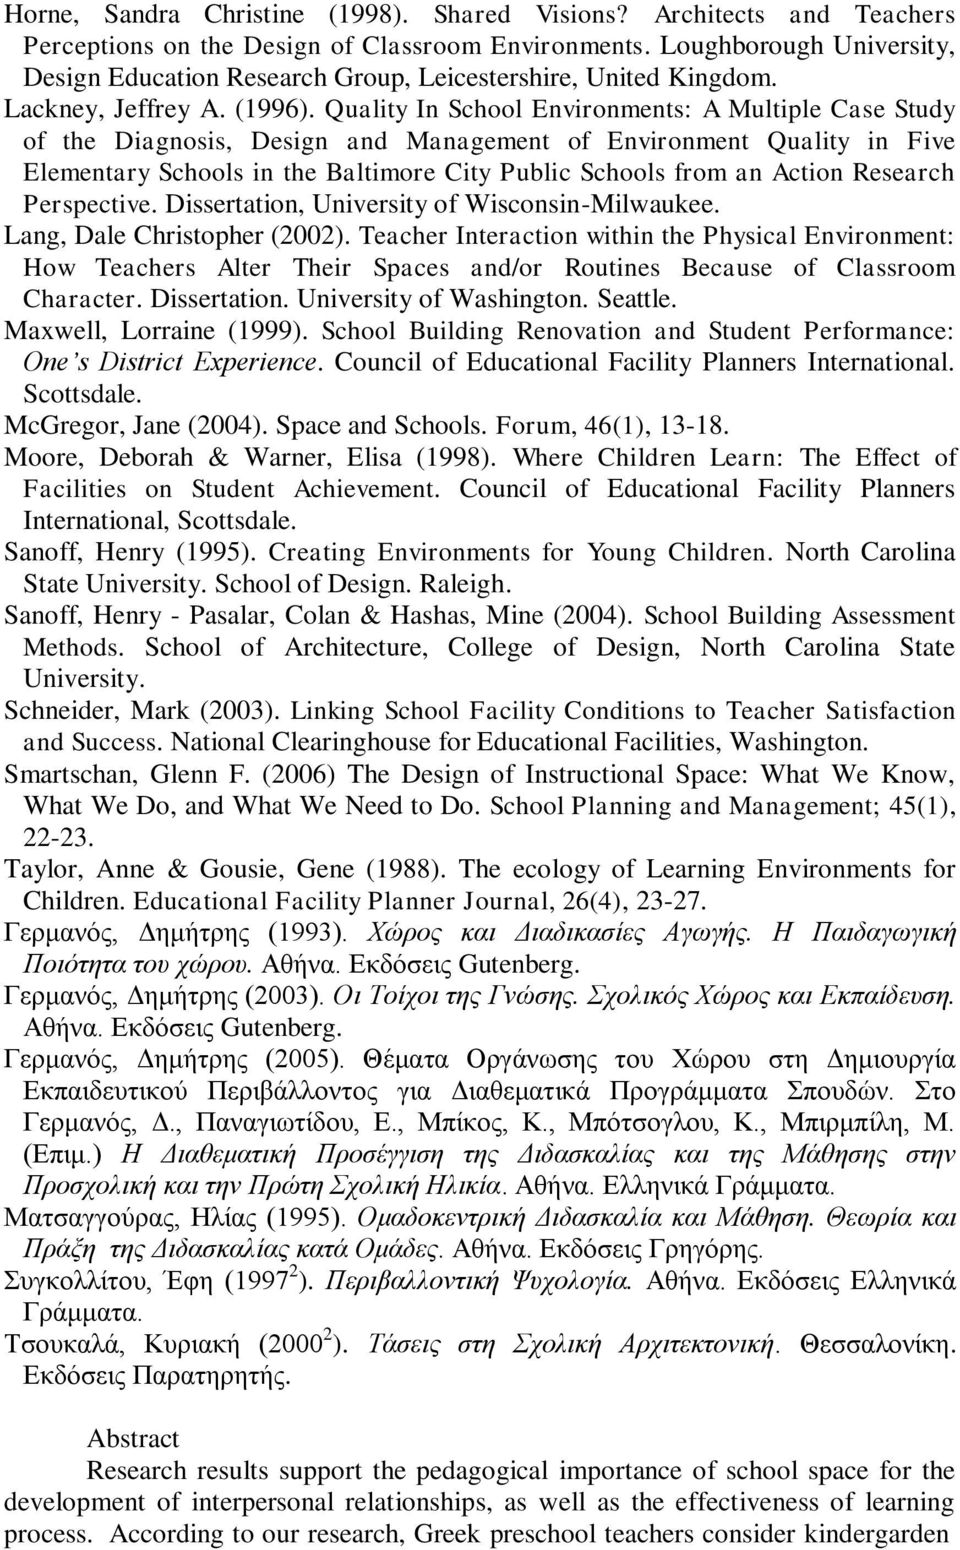 Quality In School Environments: A Multiple Case Study of the Diagnosis, Design and Management of Environment Quality in Five Elementary Schools in the Baltimore City Public Schools from an Action